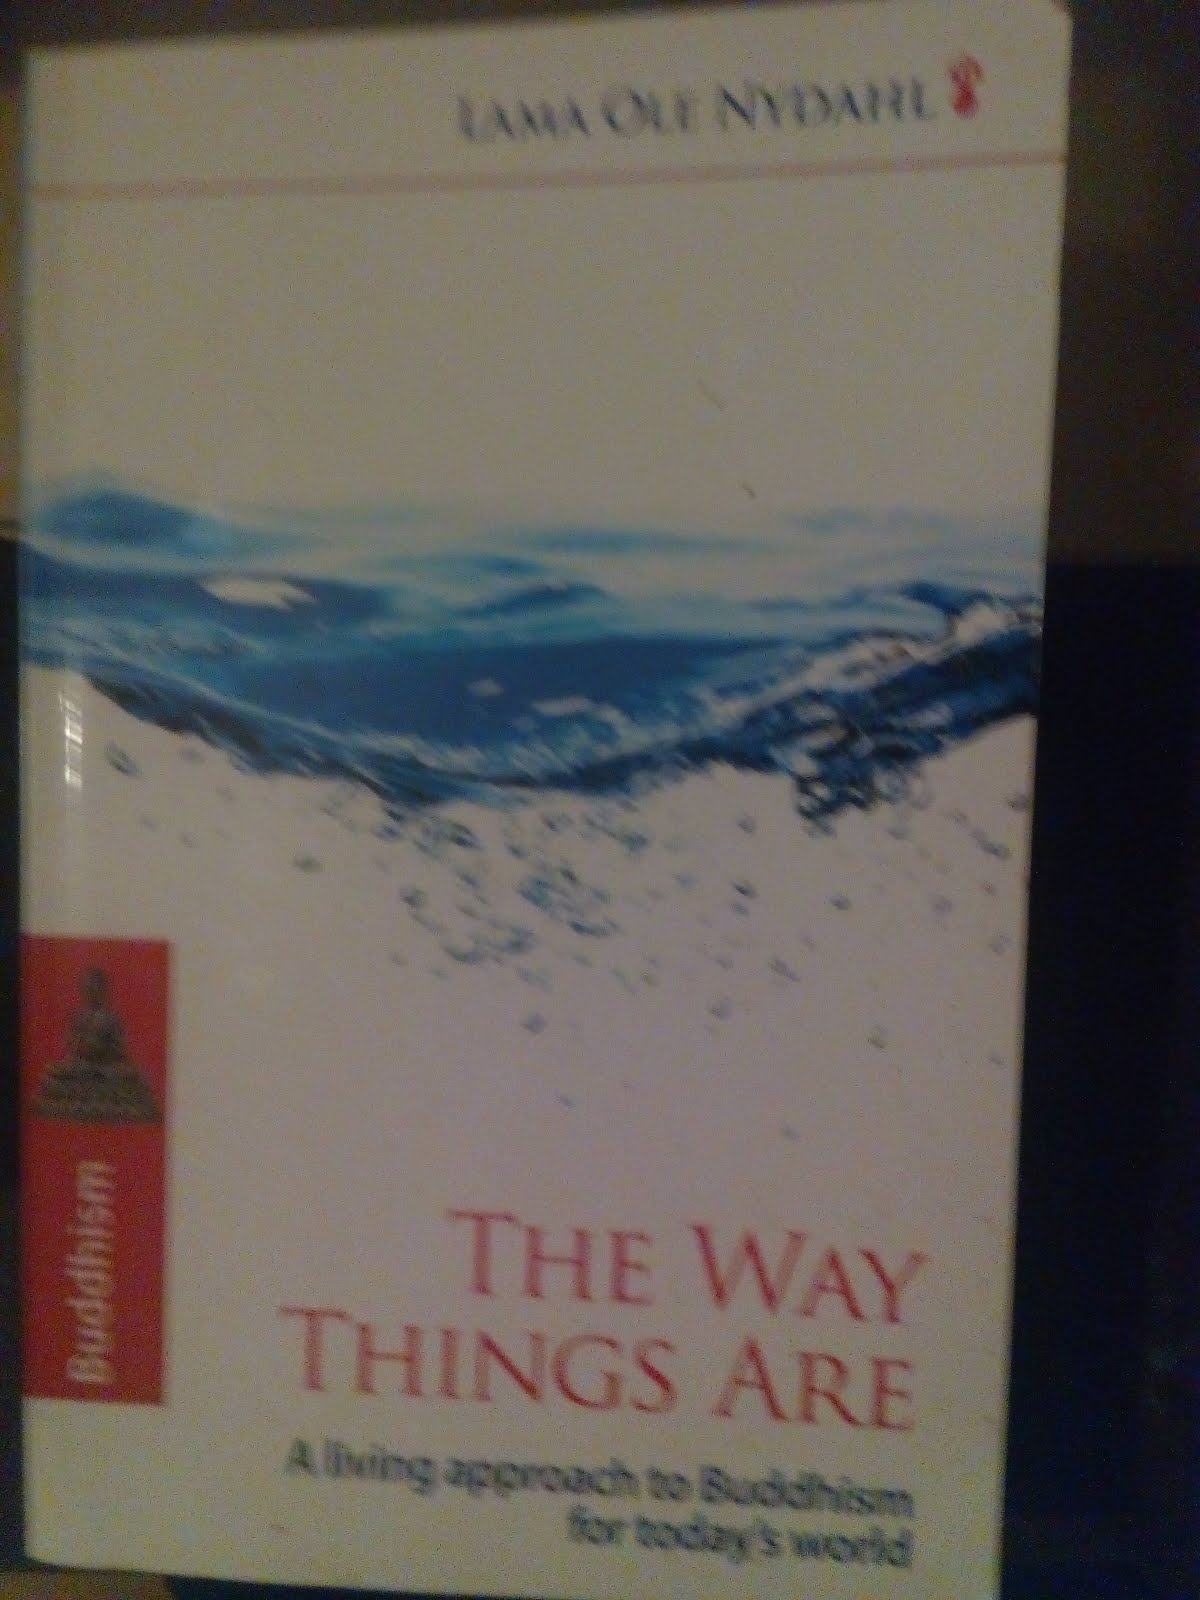 'The Way Things Are' by Lama Ole Nydahl.